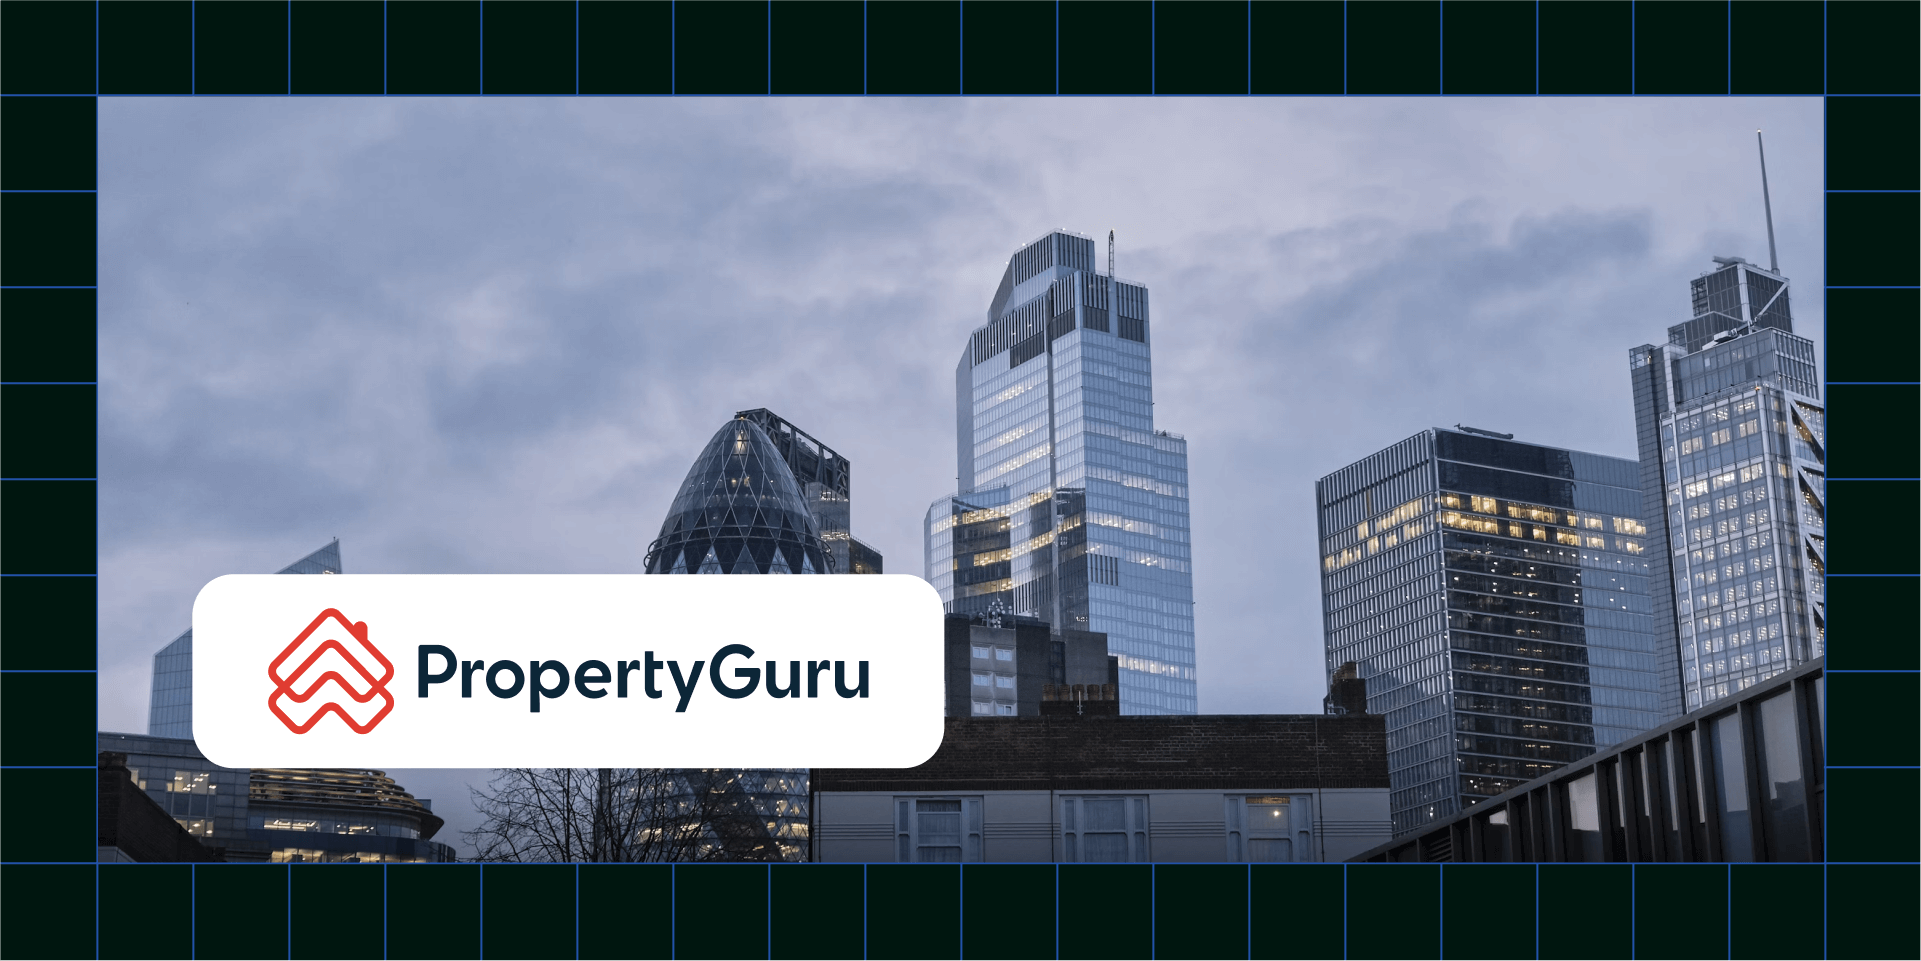 PropertyGuru speeds time to integrate new sources from months to hours 